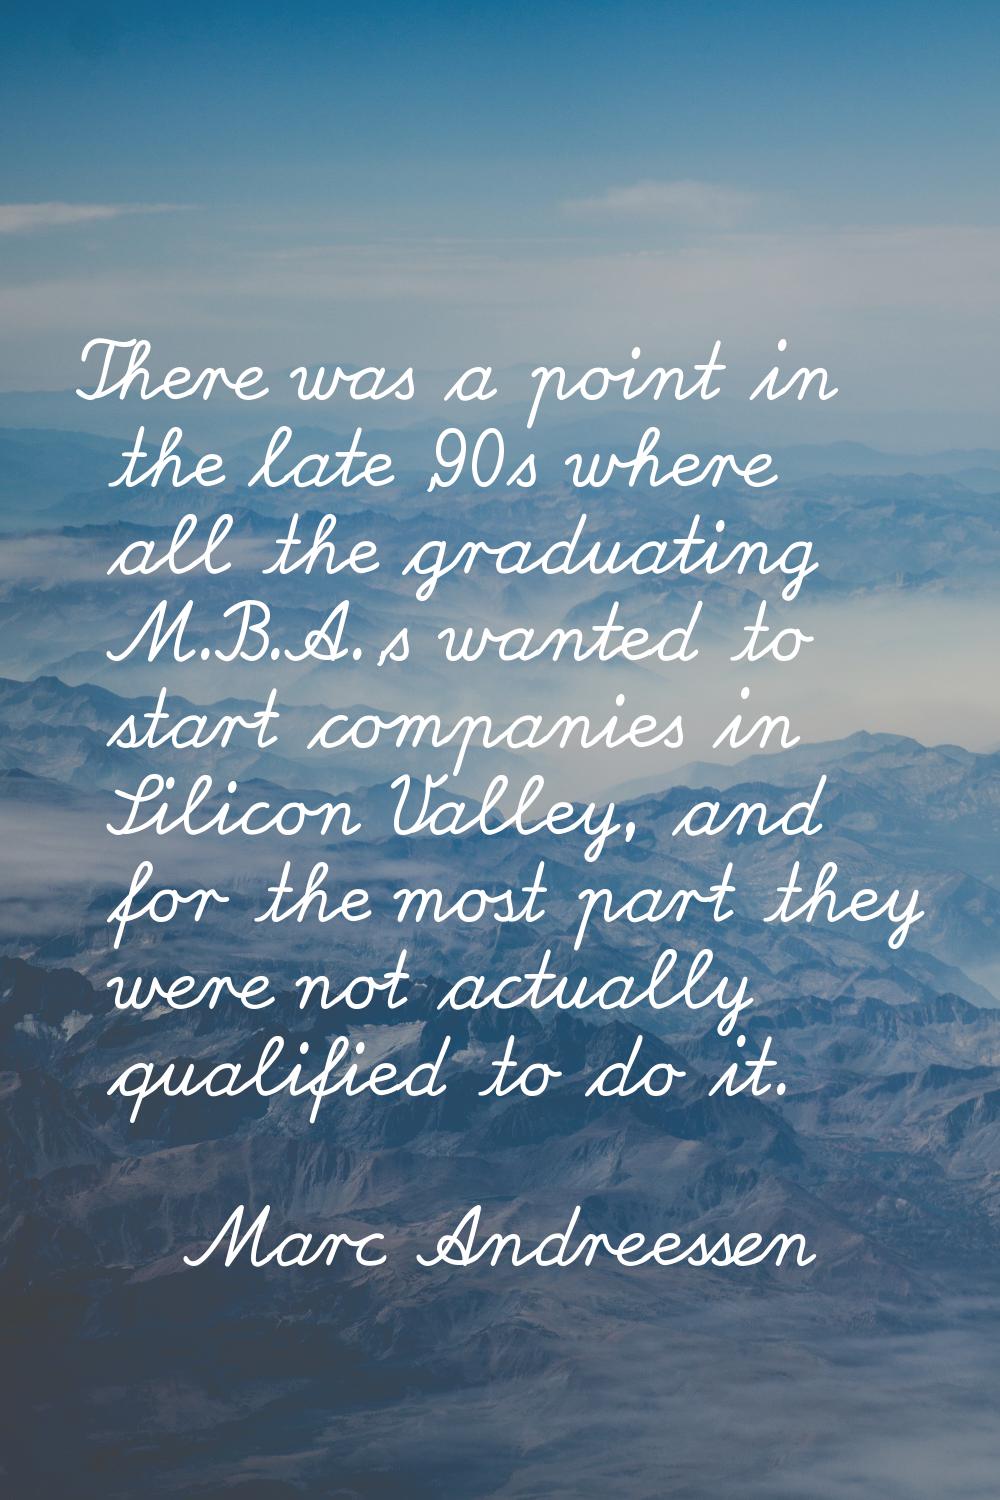 There was a point in the late '90s where all the graduating M.B.A.'s wanted to start companies in S